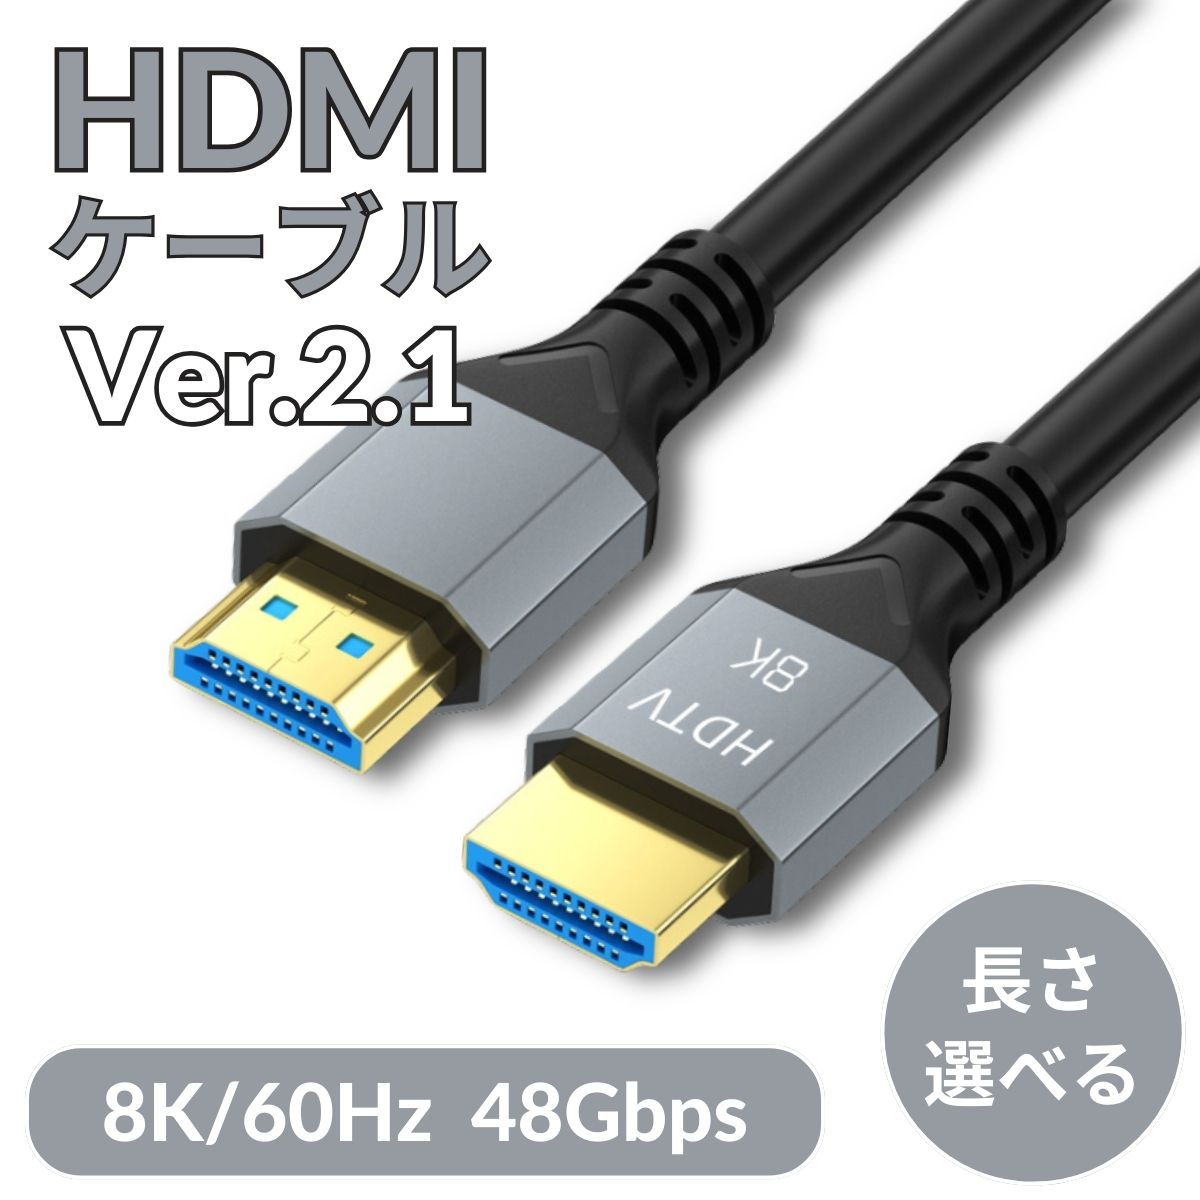 HDMI cable 1m 1.5m 2m 5m Ver.2.1 8K 3D HDMI cable personal computer PC tv 